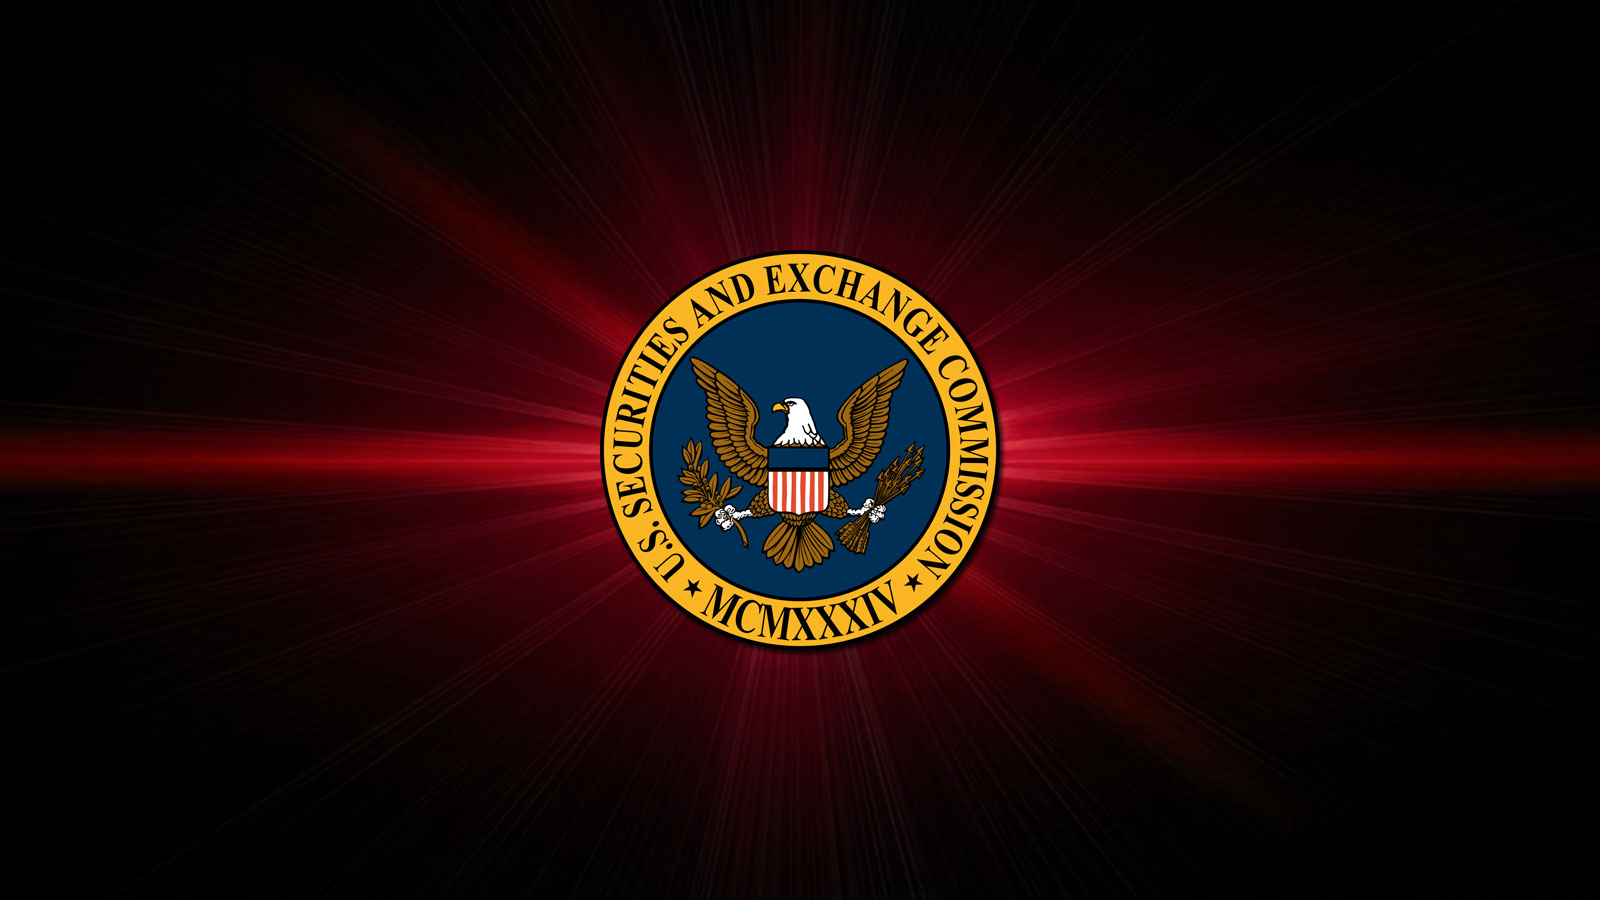 SEC confirms X account was hacked in SIM swapping attack